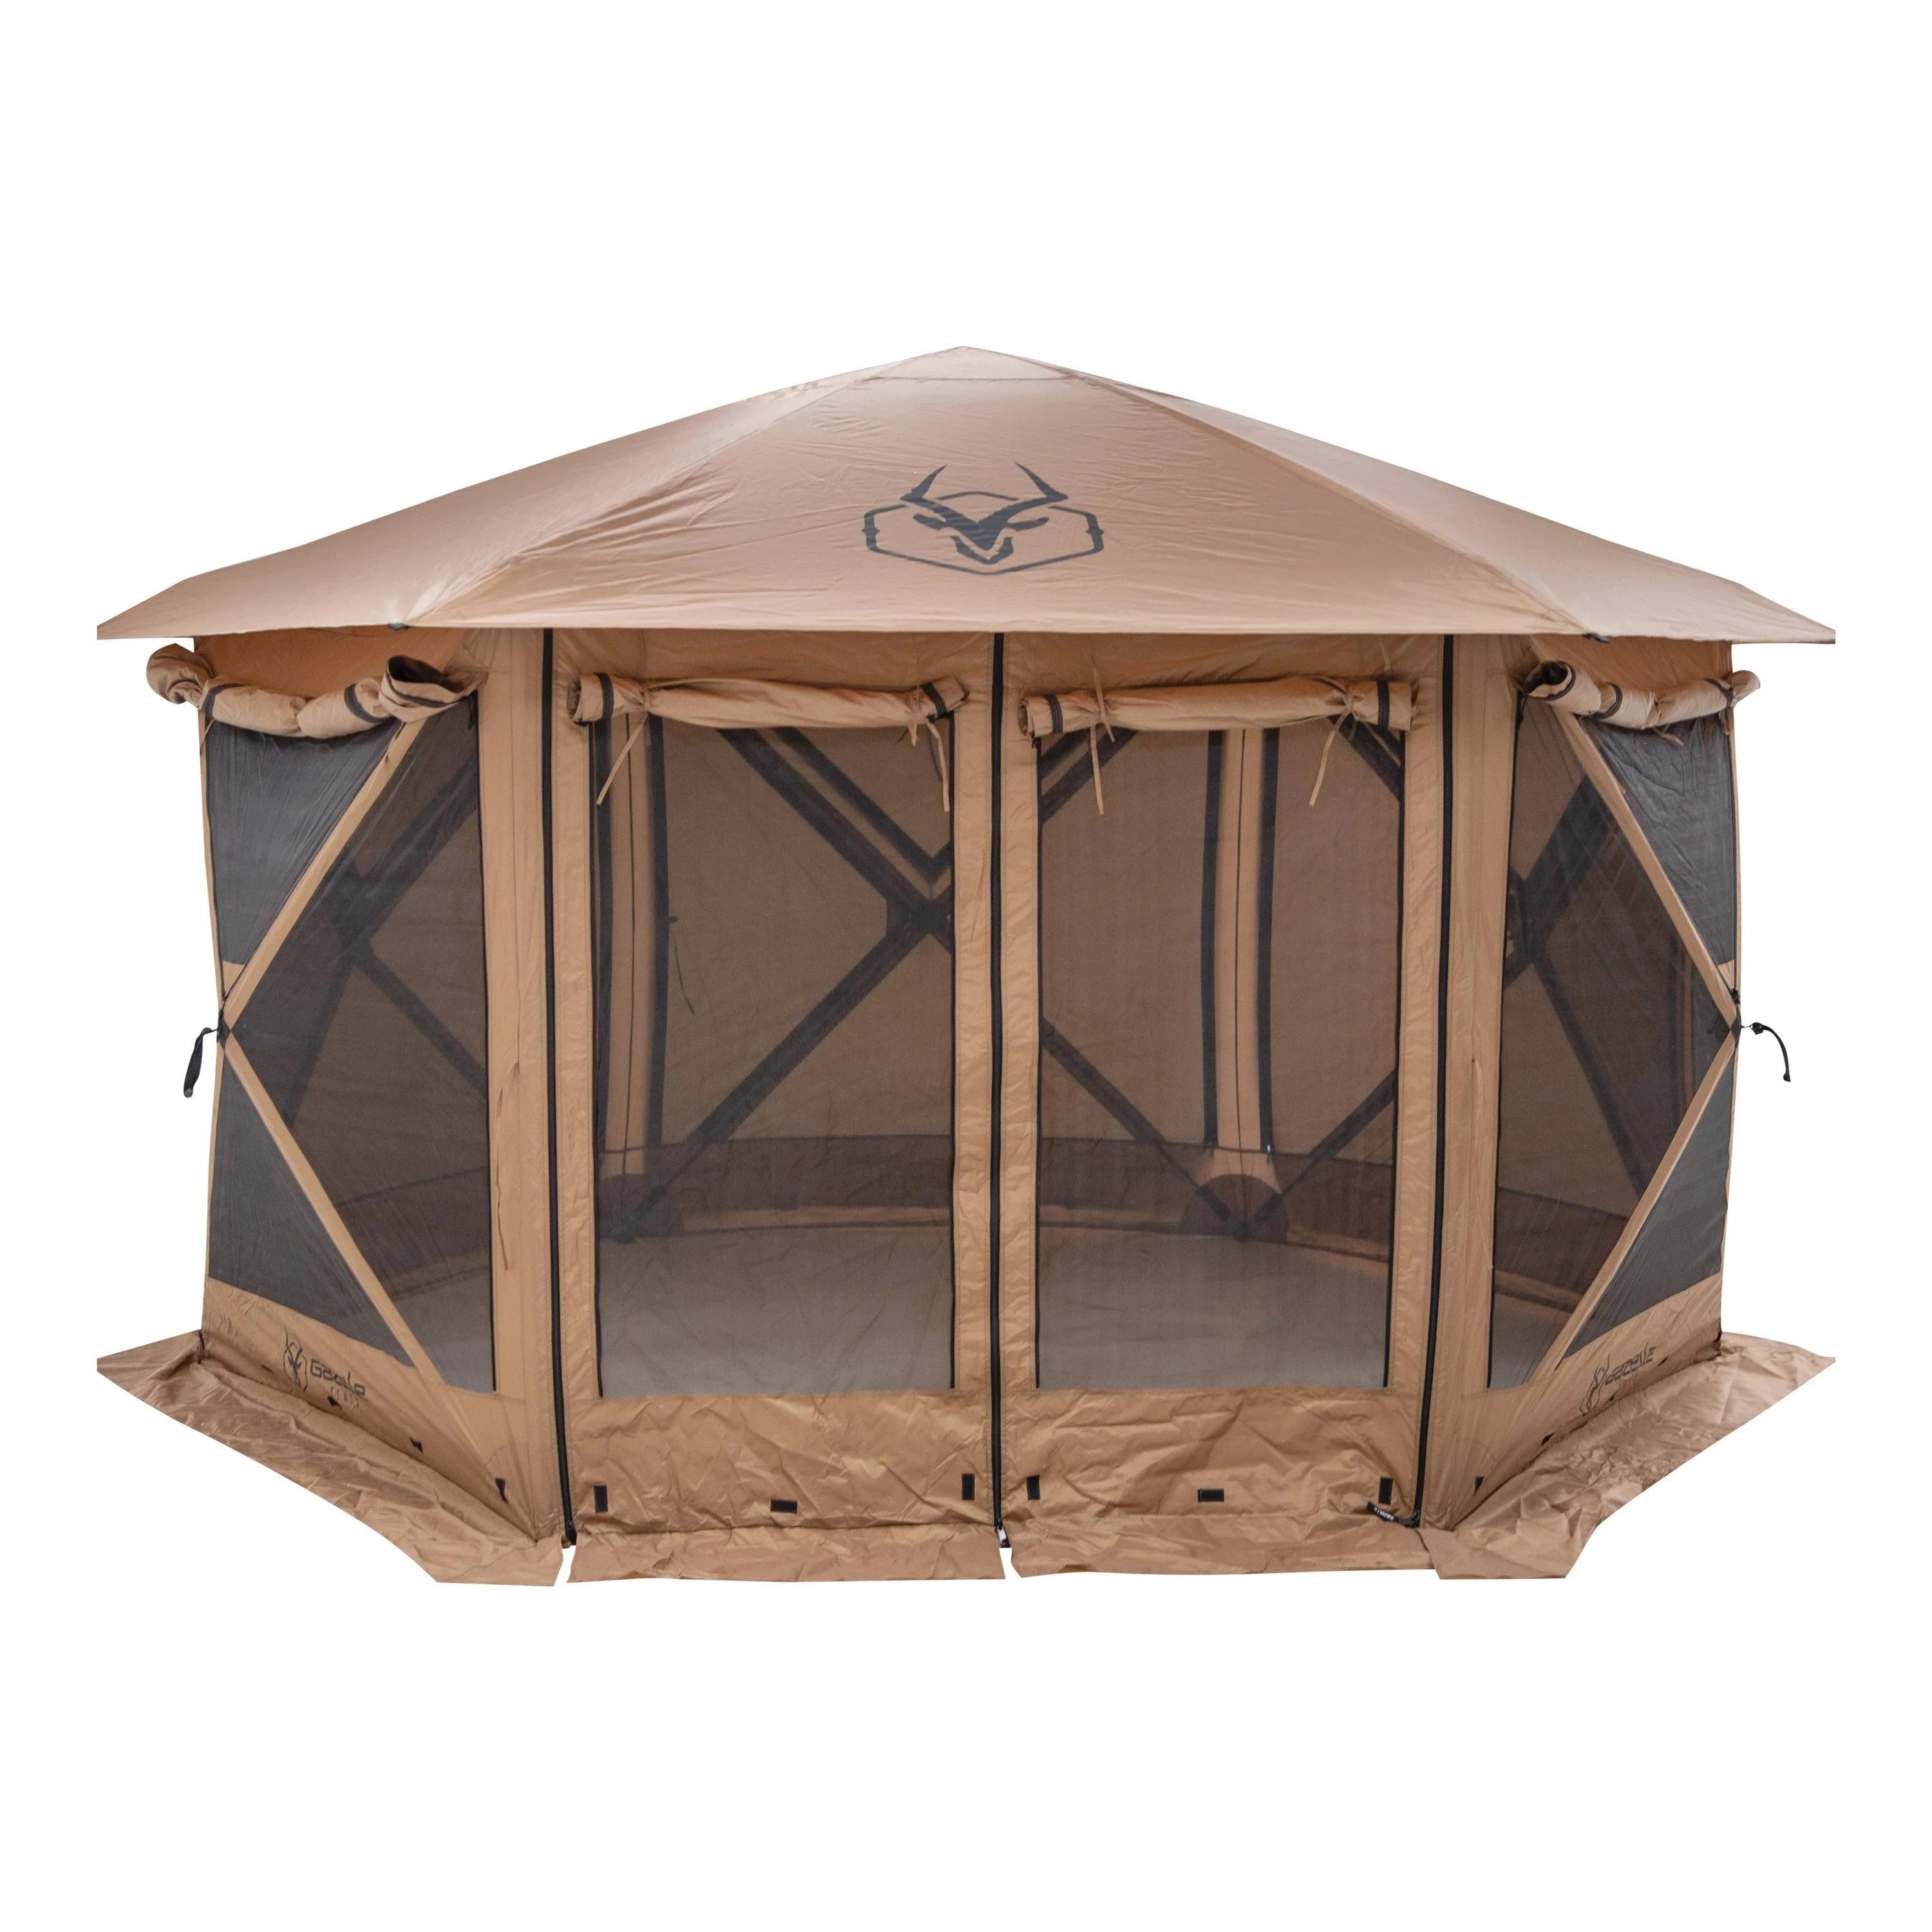 Gazelle G6 Cool Top Portable Gazebo: Spacious Multi-Functional 6-Sided Tent for 8 People | Image